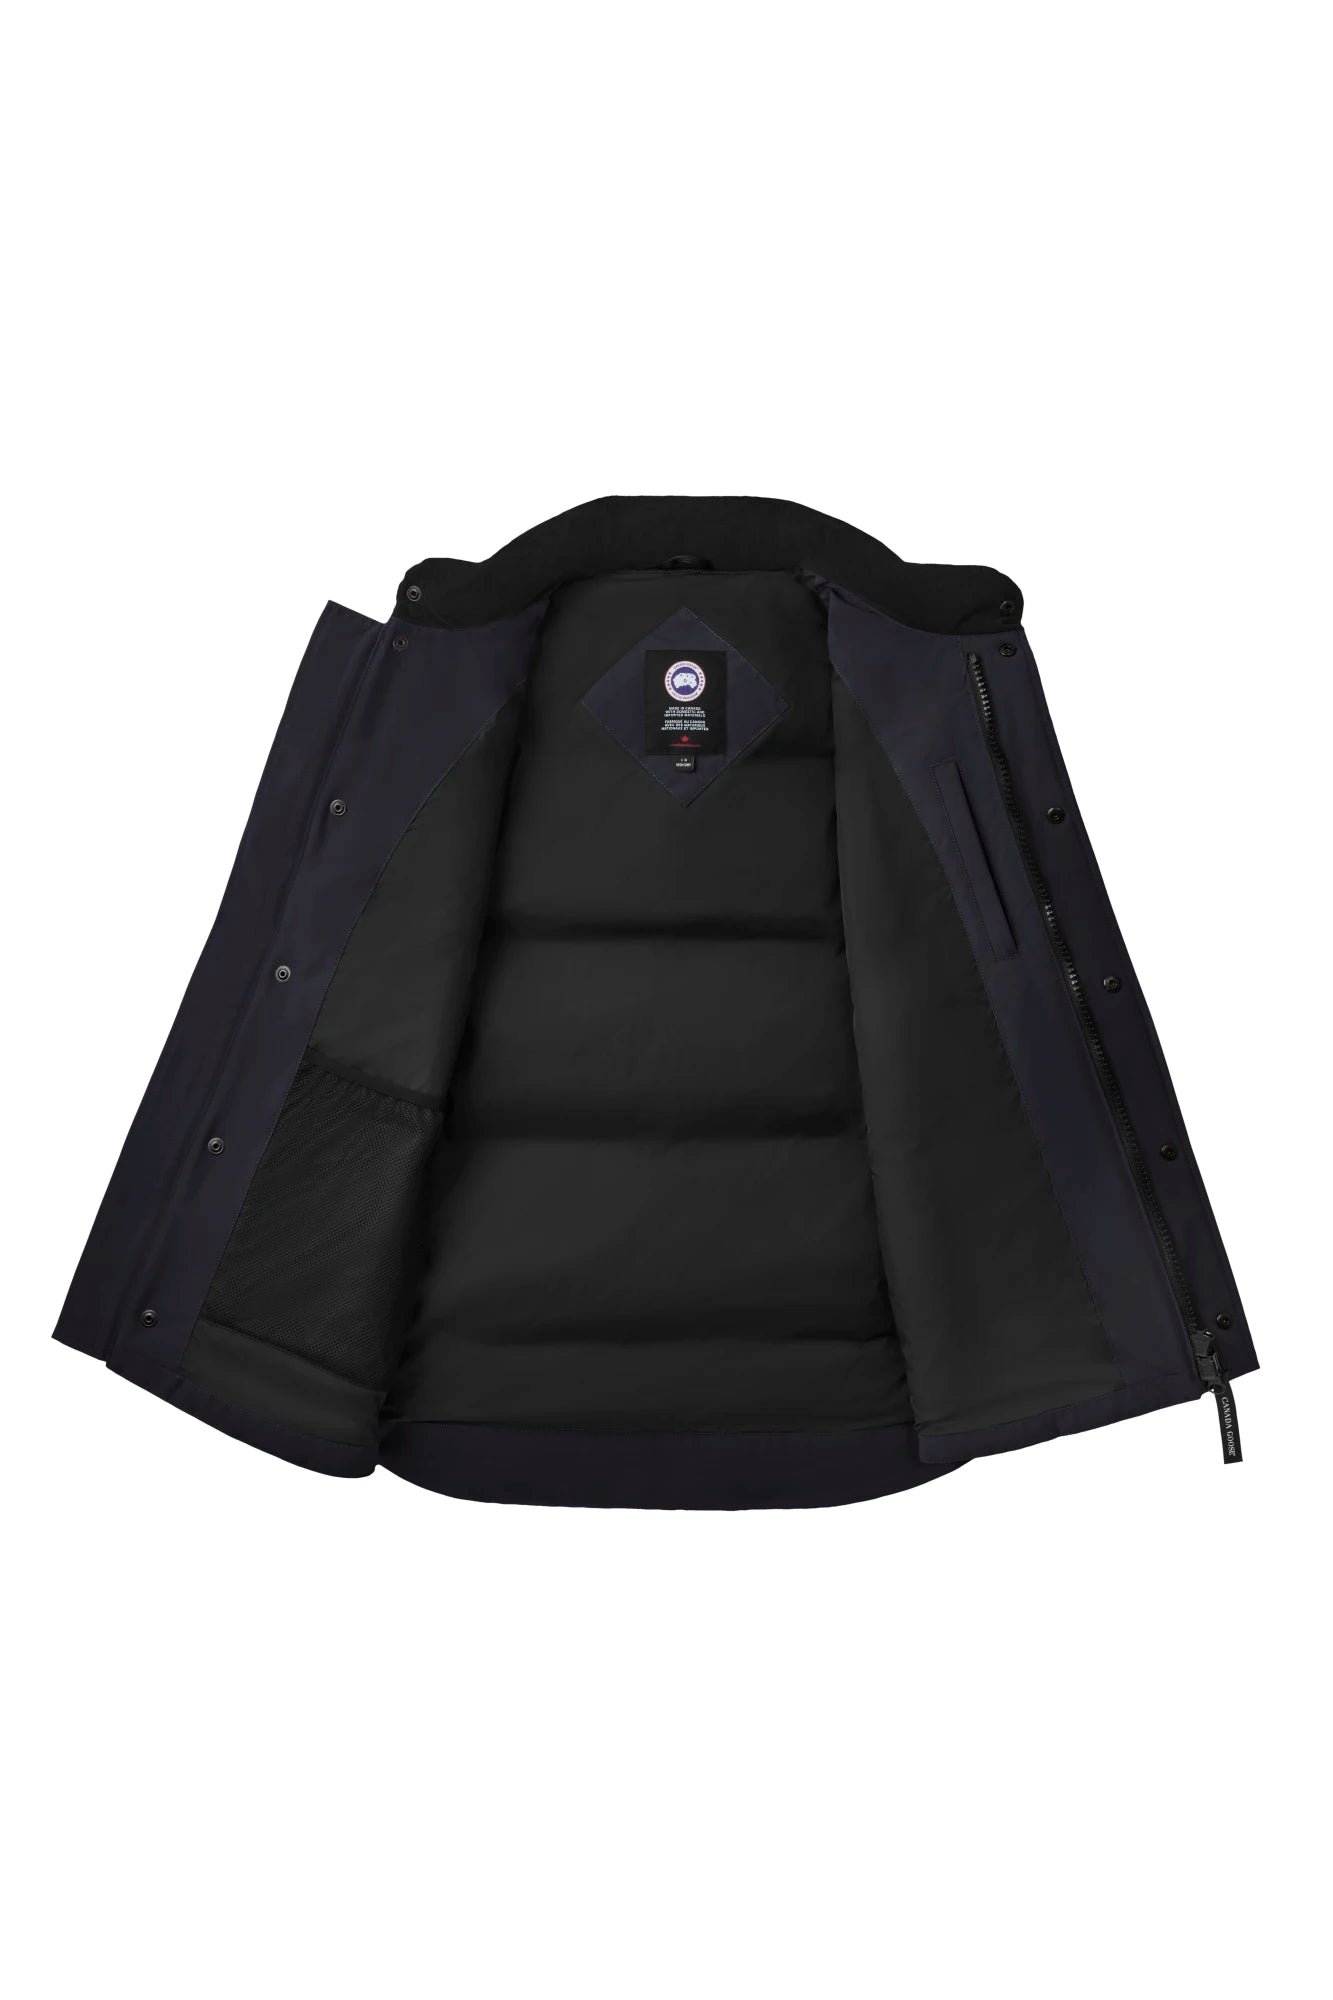 Canada Goose Freestyle Black Label gilet - Red